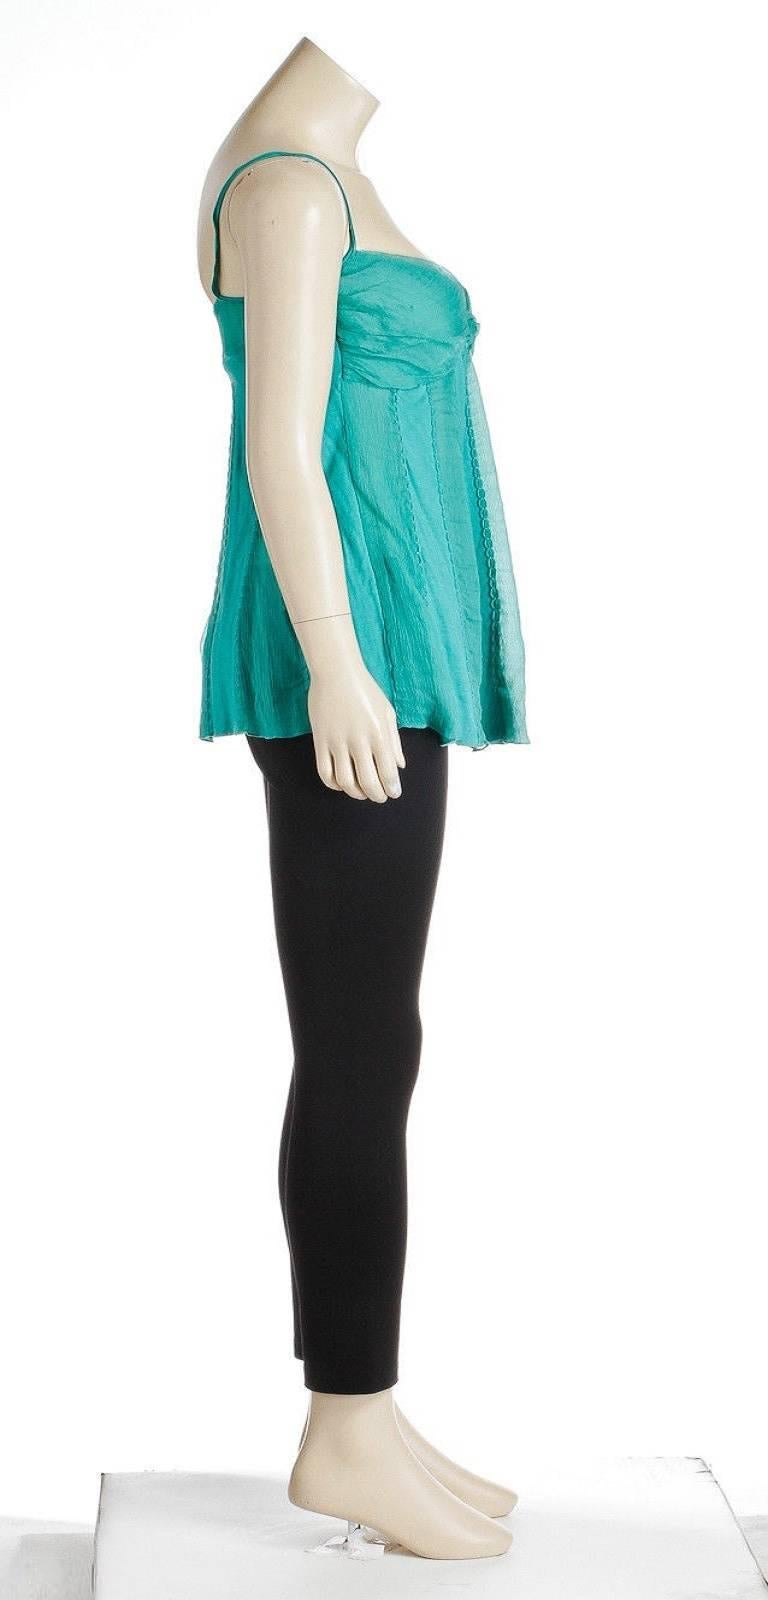 A fantastic top that you can layer and wear with confidence is a must own. This beautiful top has been crafted from a super nice silk blend for a super comfortable feel. This Catherine Malandrino top can easily be worn underneath tops and jackets.